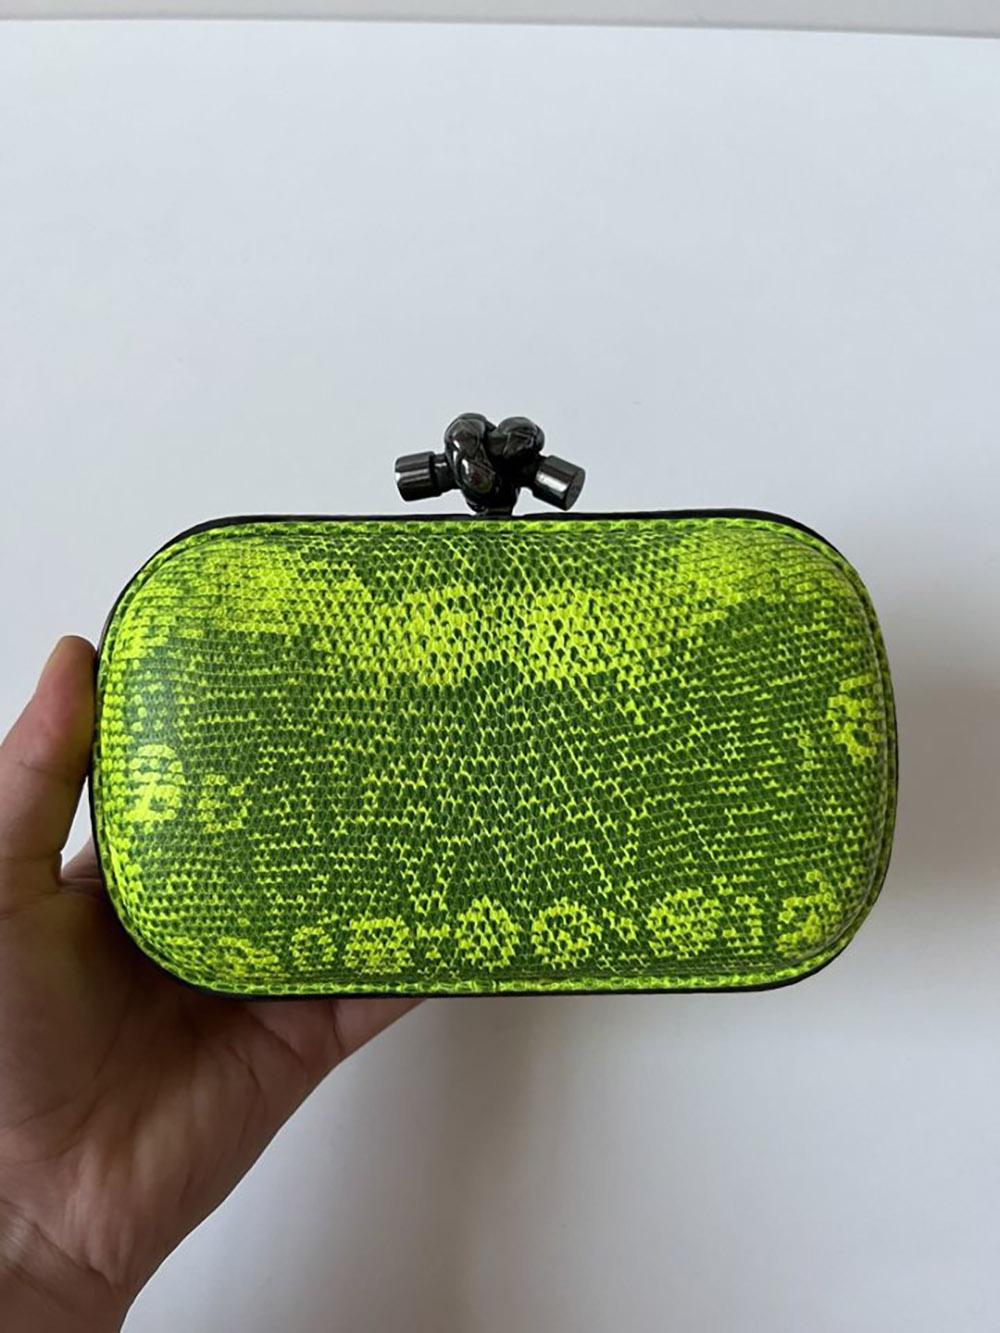 Botega Veneta's most iconic clutch POCHETTE KNOT in lizard leather of neon green colour.
Excellent condition. Size 17cm wide - 11 cm high.